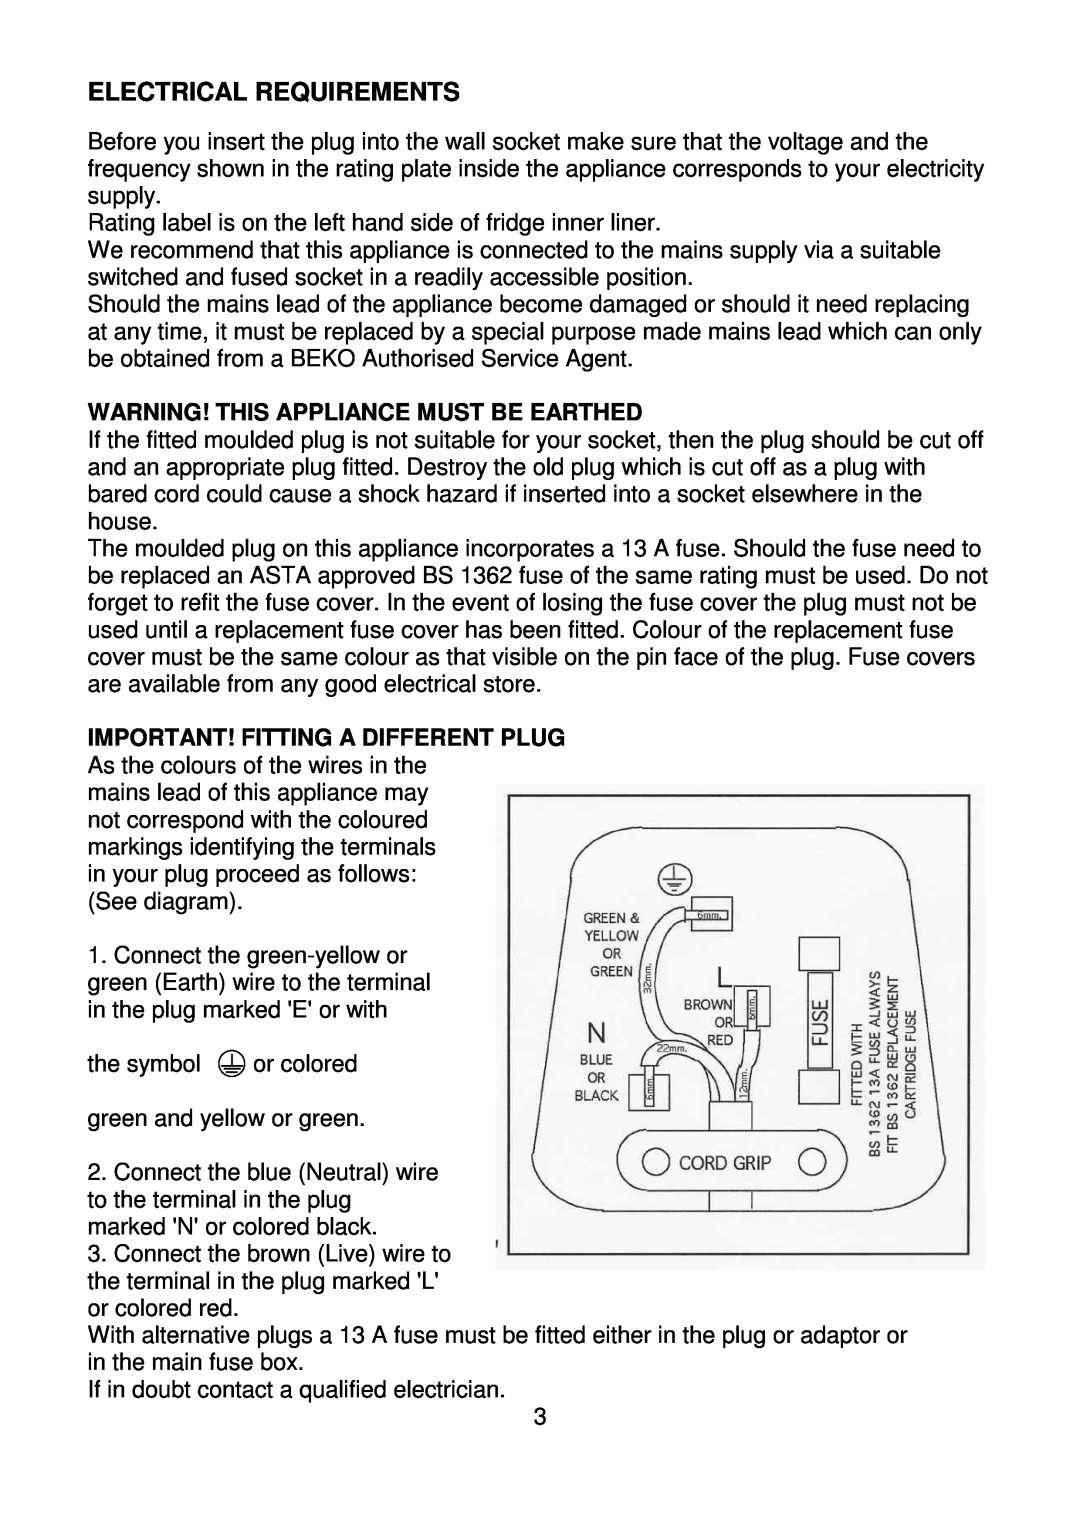 Beko CDA660F Electrical Requirements, Warning! This Appliance Must Be Earthed, Important! Fitting A Different Plug 